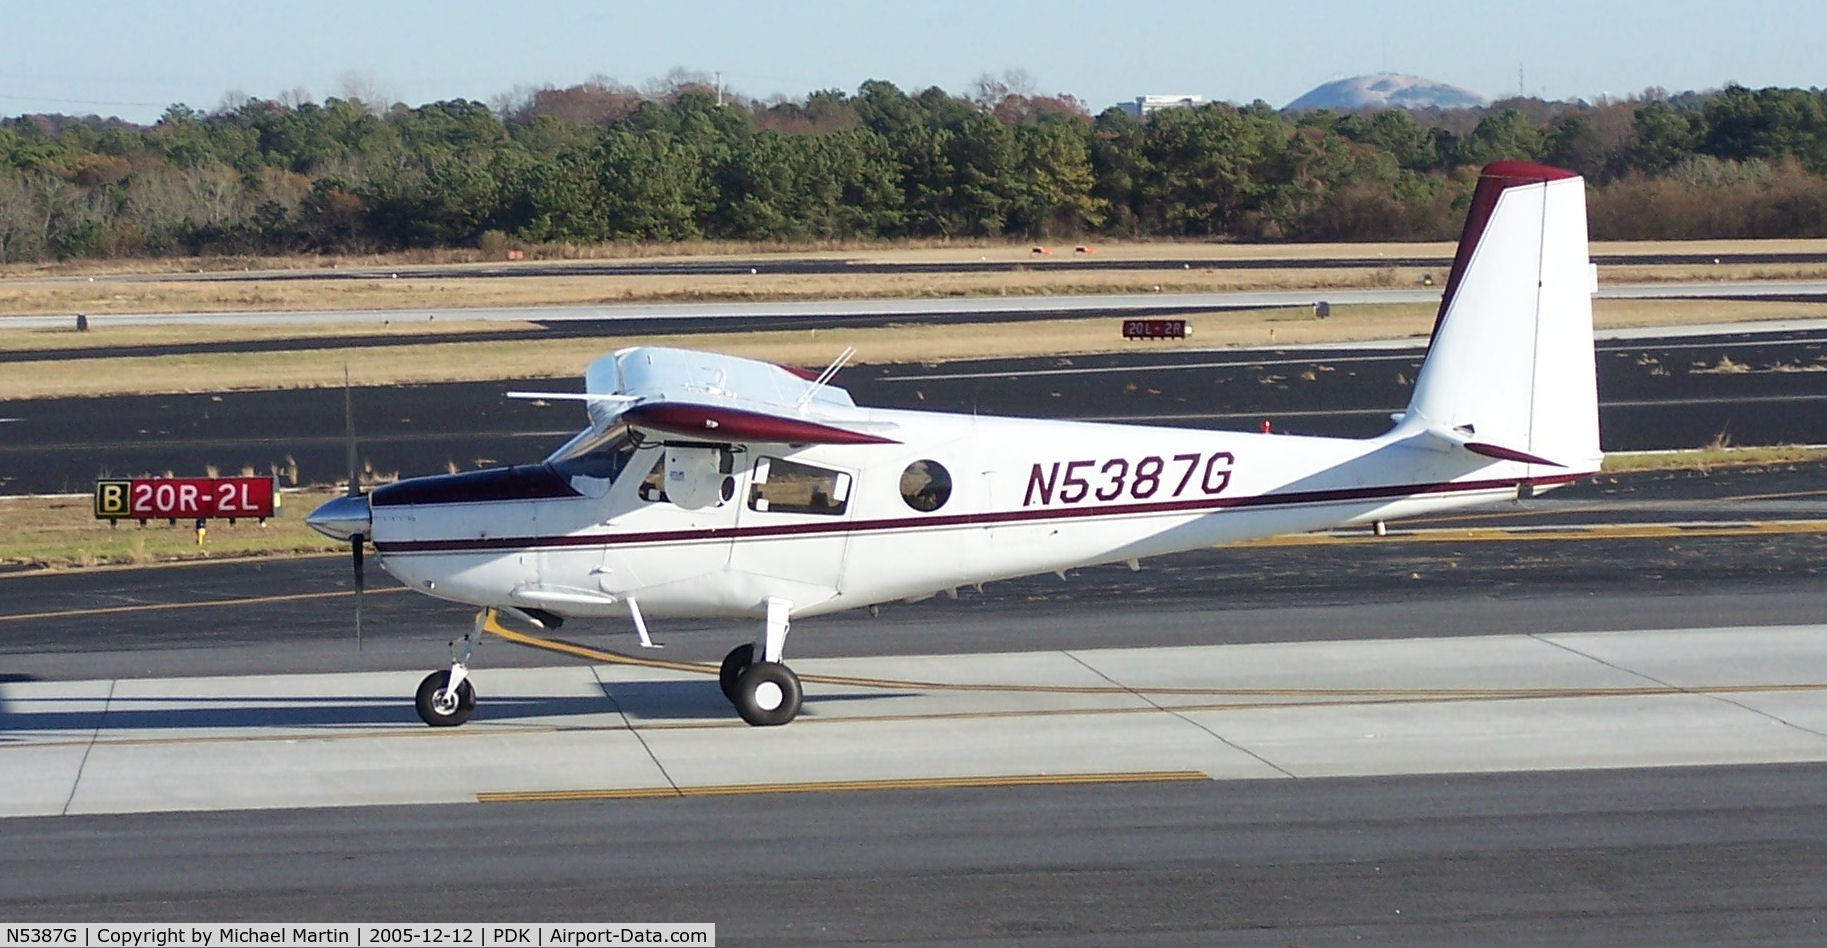 N5387G, 1967 Helio HT-295/U10D Super Courier C/N 1257 (66-14355), Check the camera under the left wing!